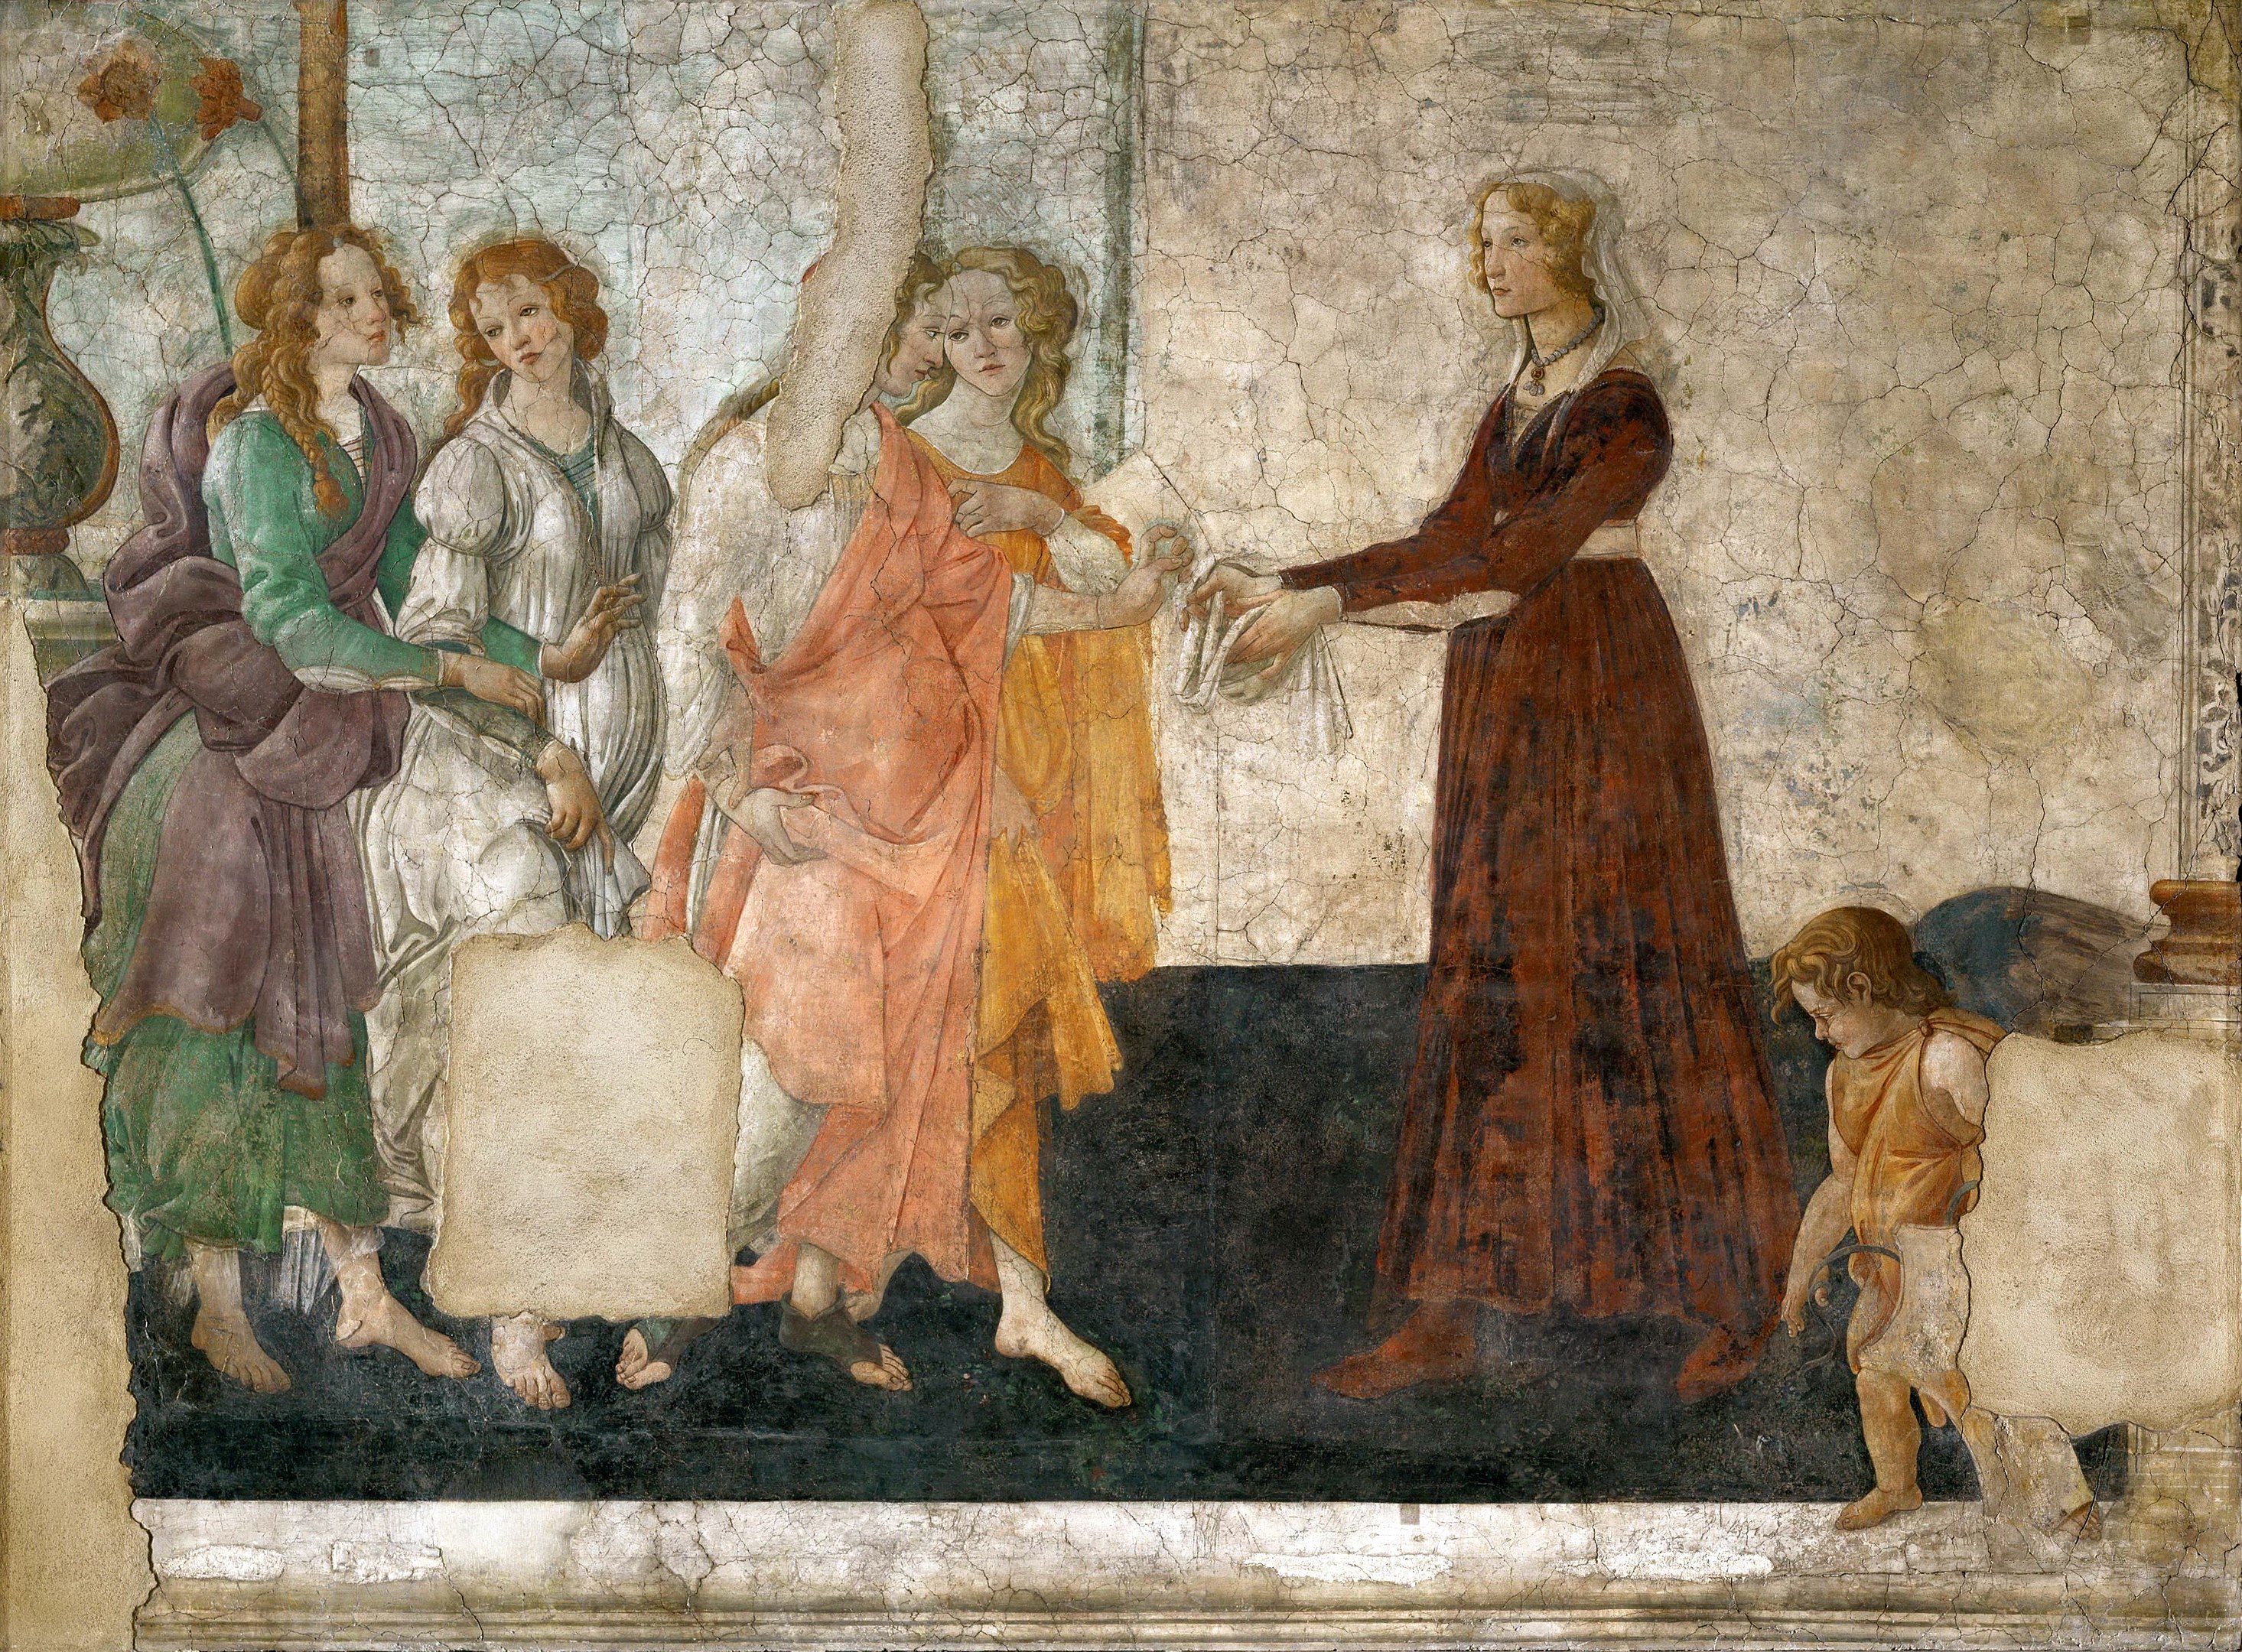 Venus and the Three Graces Presenting Gifts to a Young Woman by Sandro Botticelli - 1483–1486 - 211 × 283 cm Musée du Louvre